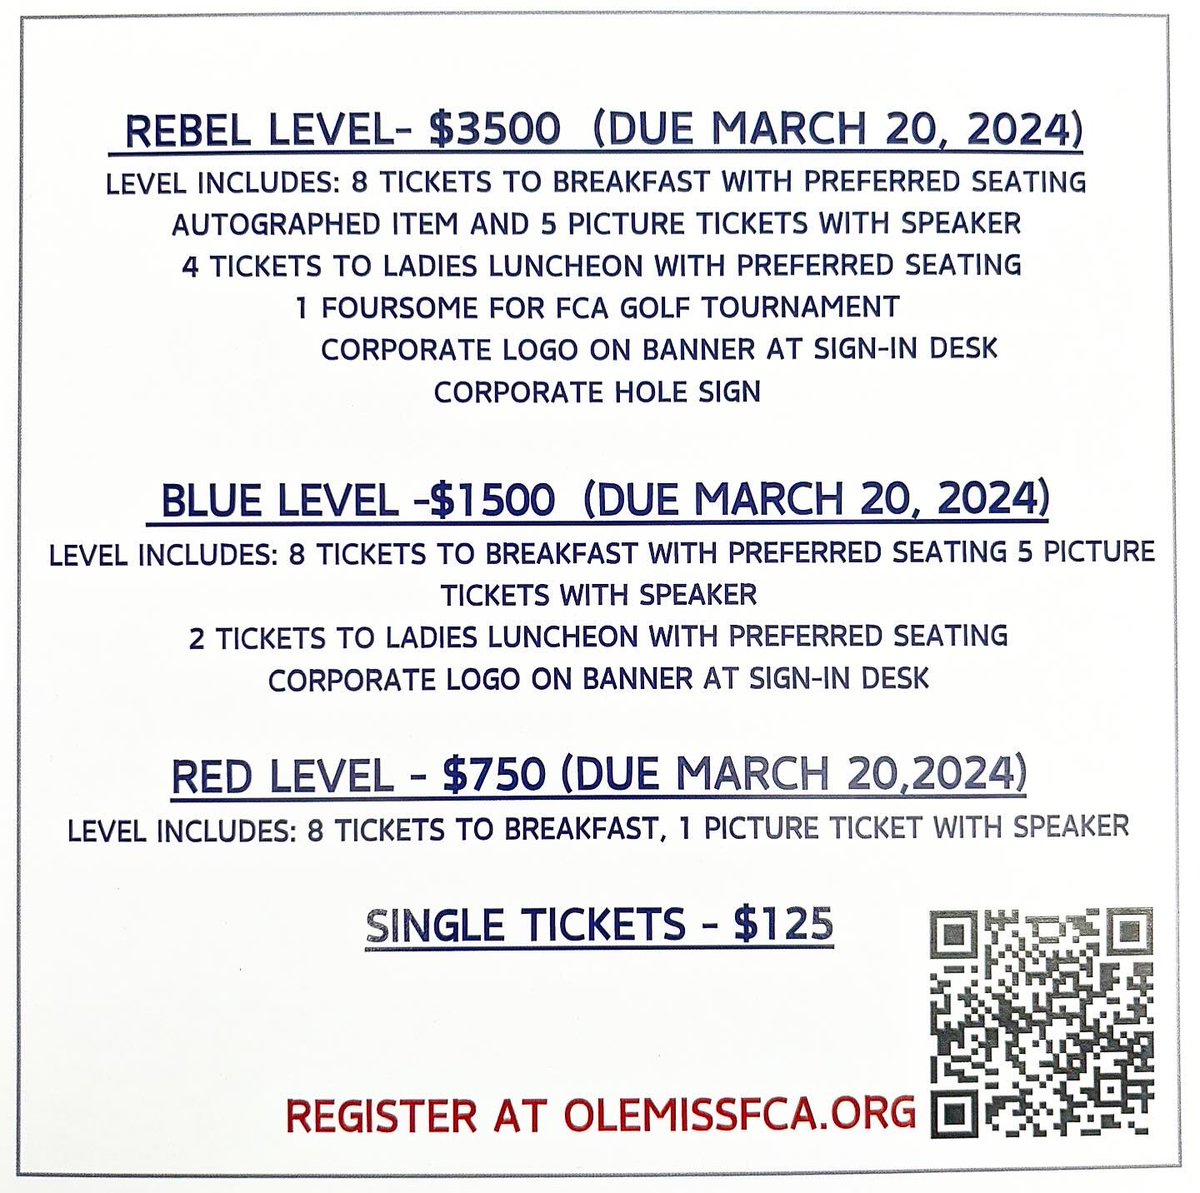 We are now 25 days away from our Annual Breakfast with Champions! Secure your tickets now! Register online at olemissfca.org/breakfast-with… ! It's going to be great- Can't wait to see you there!